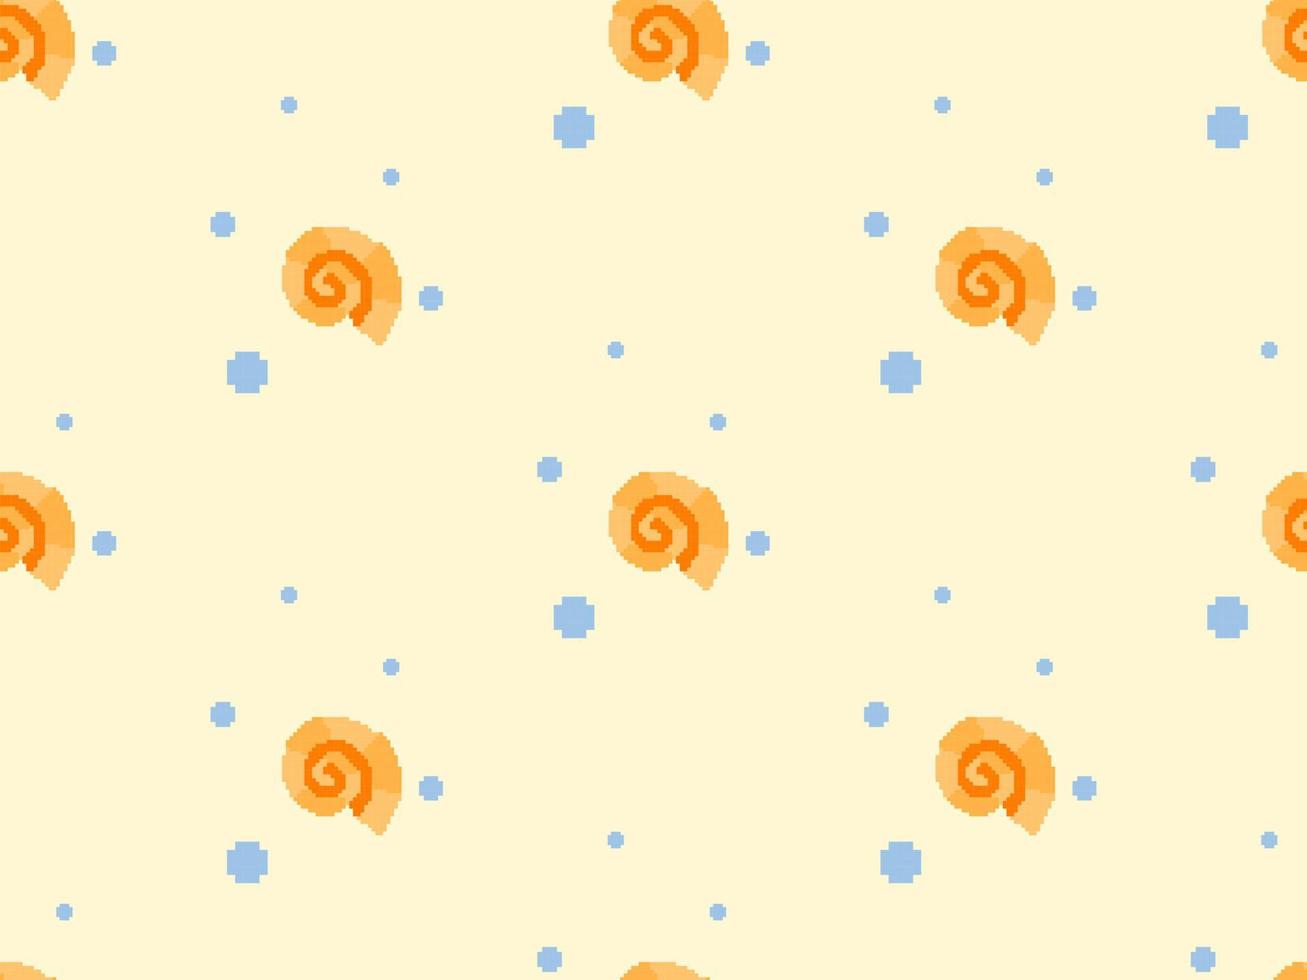 Shell cartoon character seamless pattern on yellow background.Pixel style vector